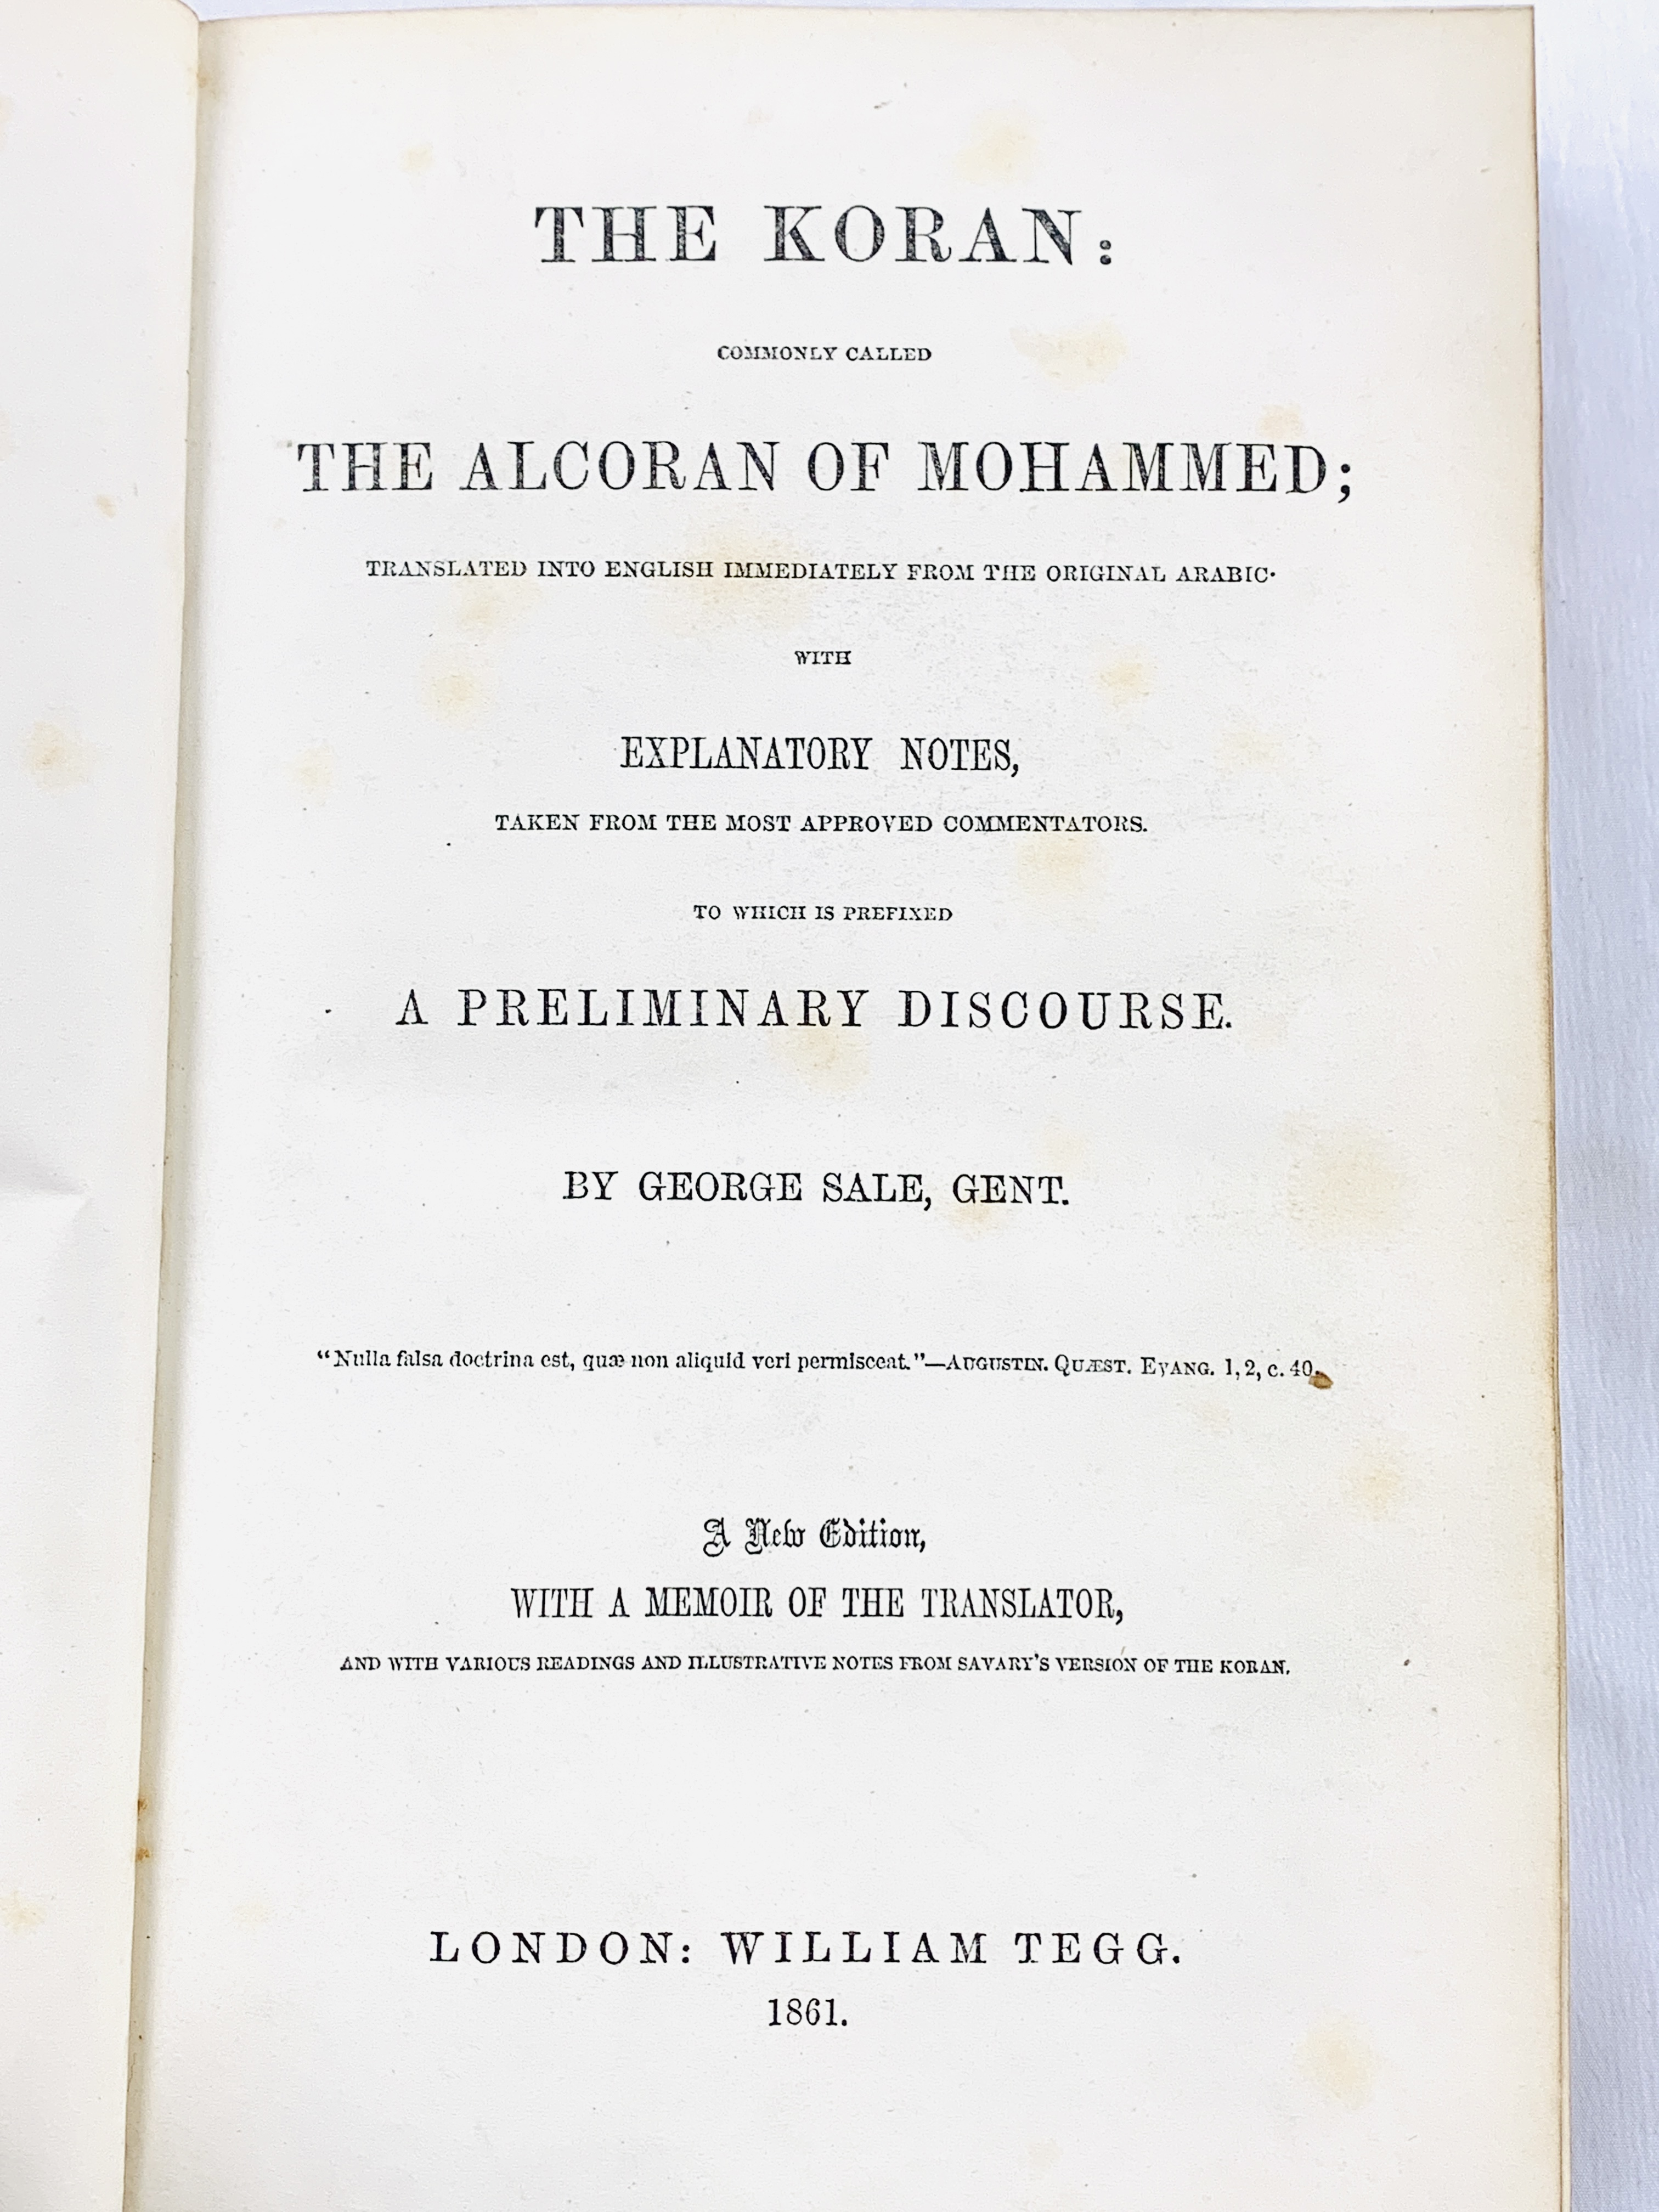 The Koran. Translated by George Sale. Published by William Tegg, 1861 - Image 2 of 4